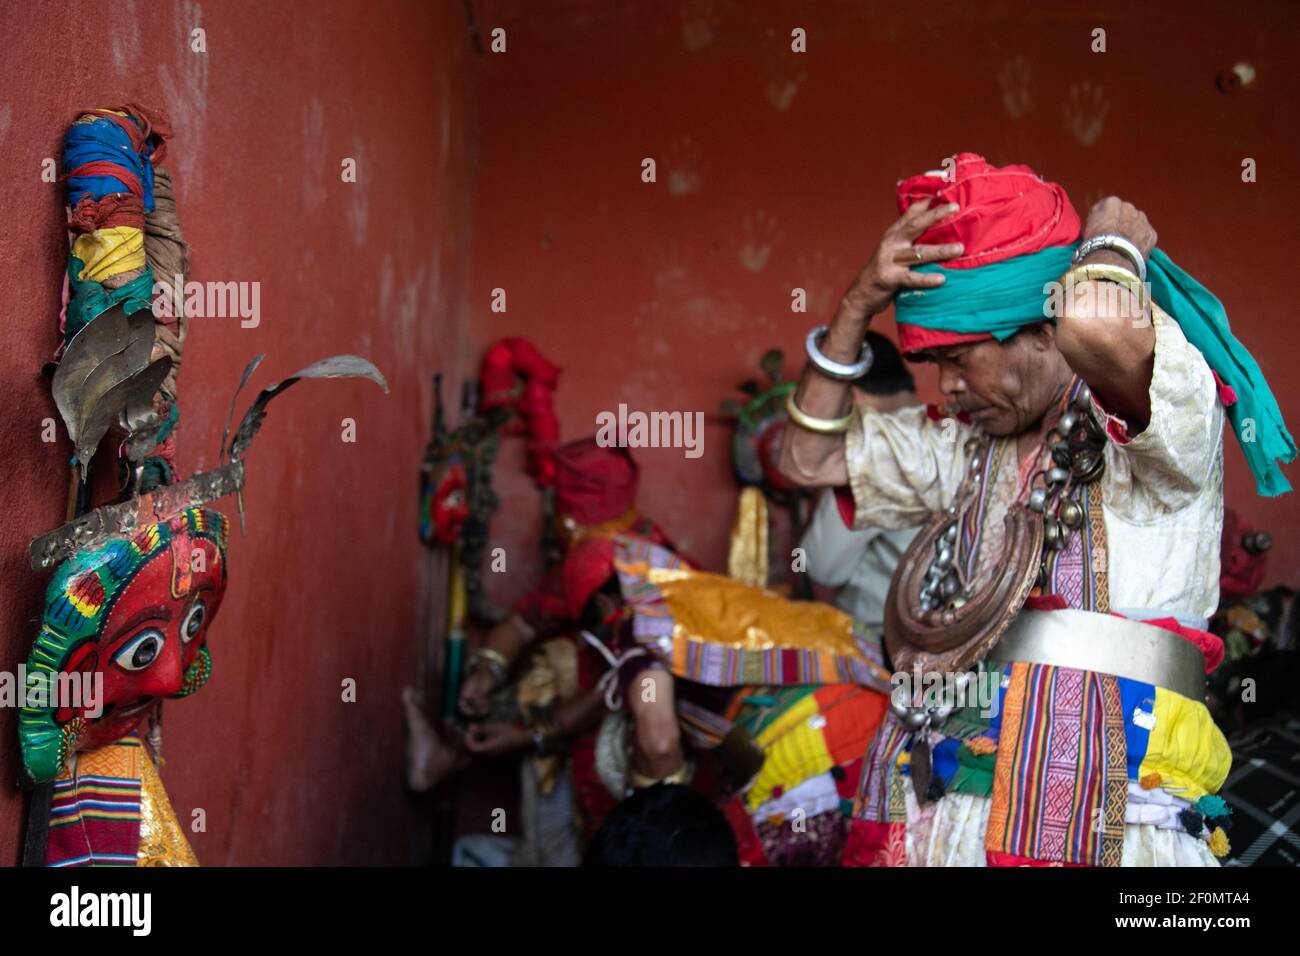 Priest in traditional attire during a deity's procession as part of the Shikali festival at Khokana village in Lalitpur, Nepal on October 4 2019. In this festival devotees worship people wearing traditional dresses with colorful clay masks. after they dance villagers sacrificed animals and prayers in hope of gaining blessing from the deities in the annual Shikali festival. (Photo by Prabin Ranabhat/Pacific Press/Sipa USA) Stock Photo